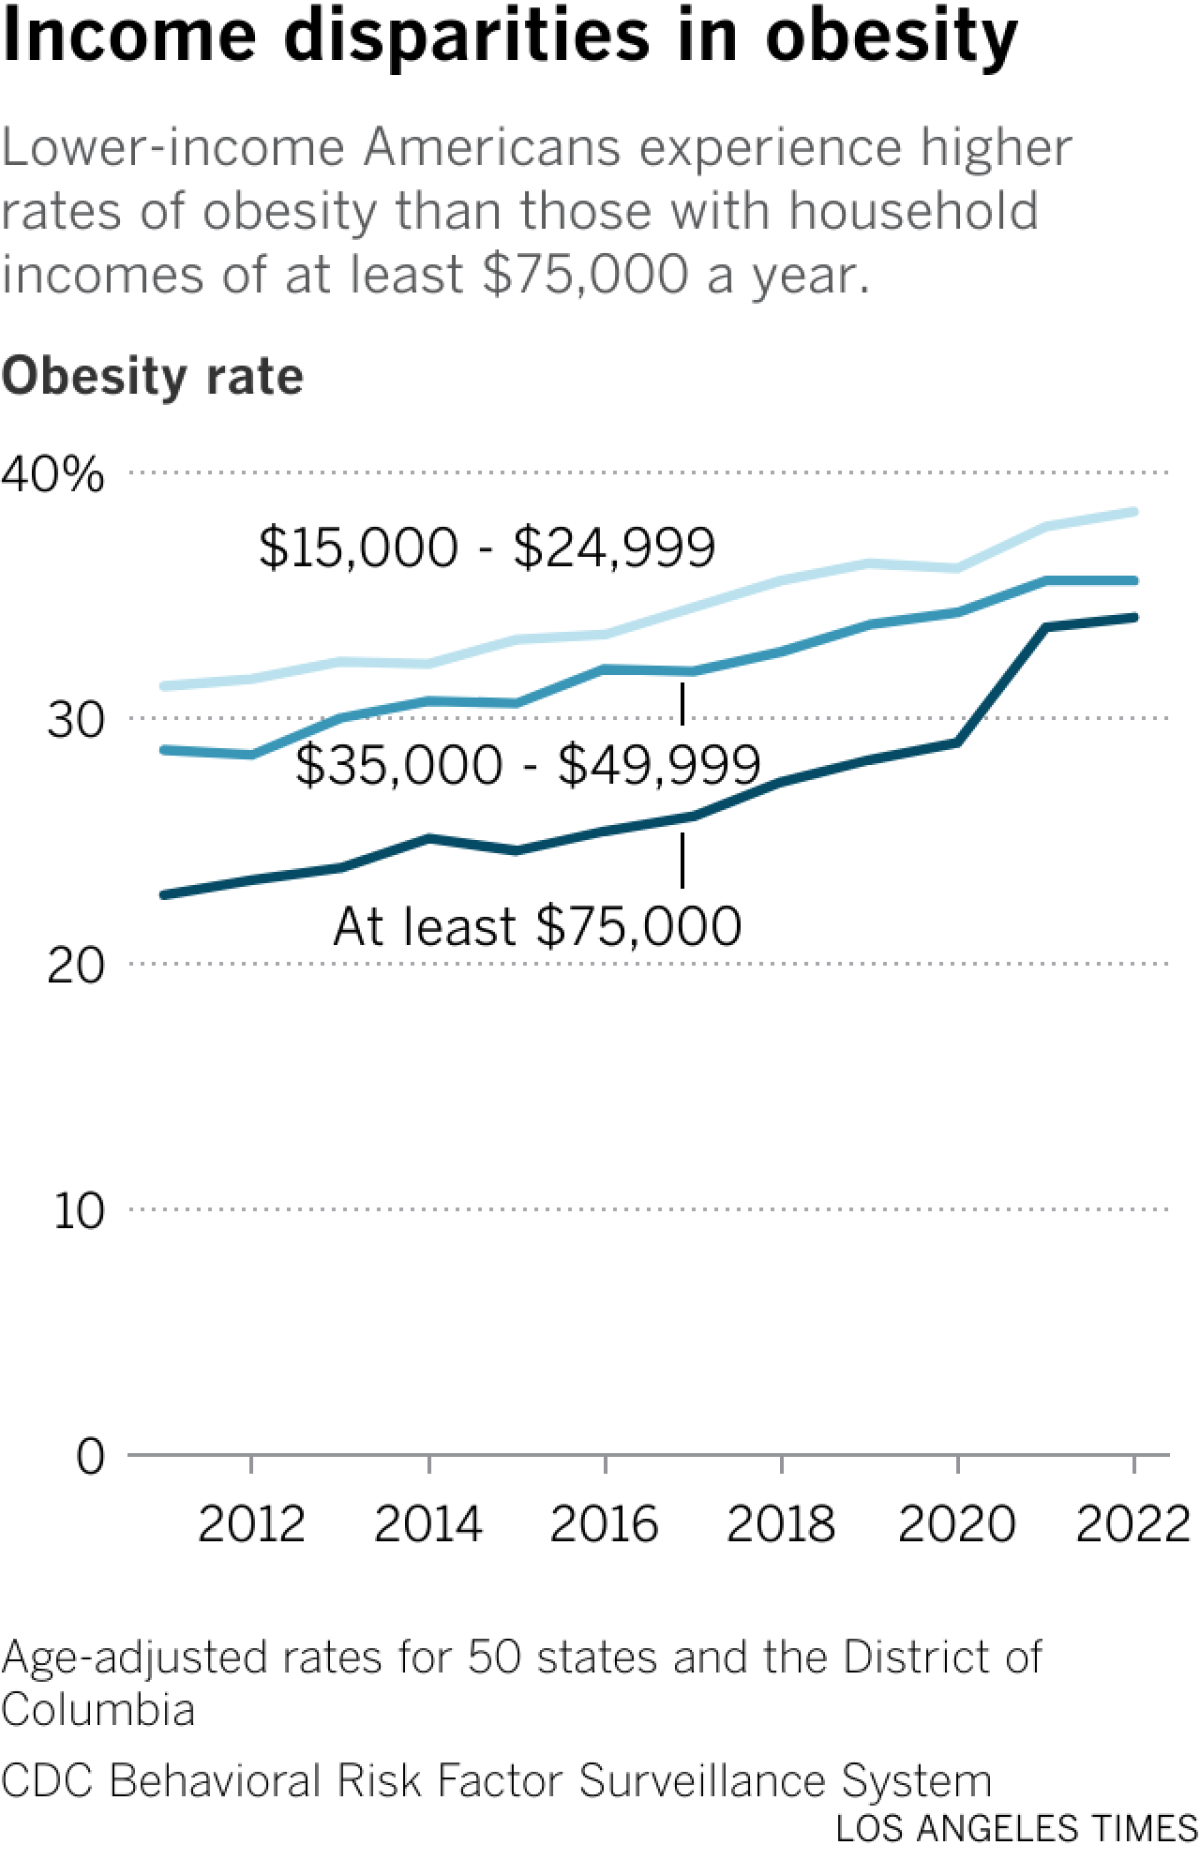 Line chart shows rates of obesity among three income categories: $15 to $26 thousand, $35 to $50 thousand and at least $75,000. Rates are higher among lower incomes, but rising for all categories.